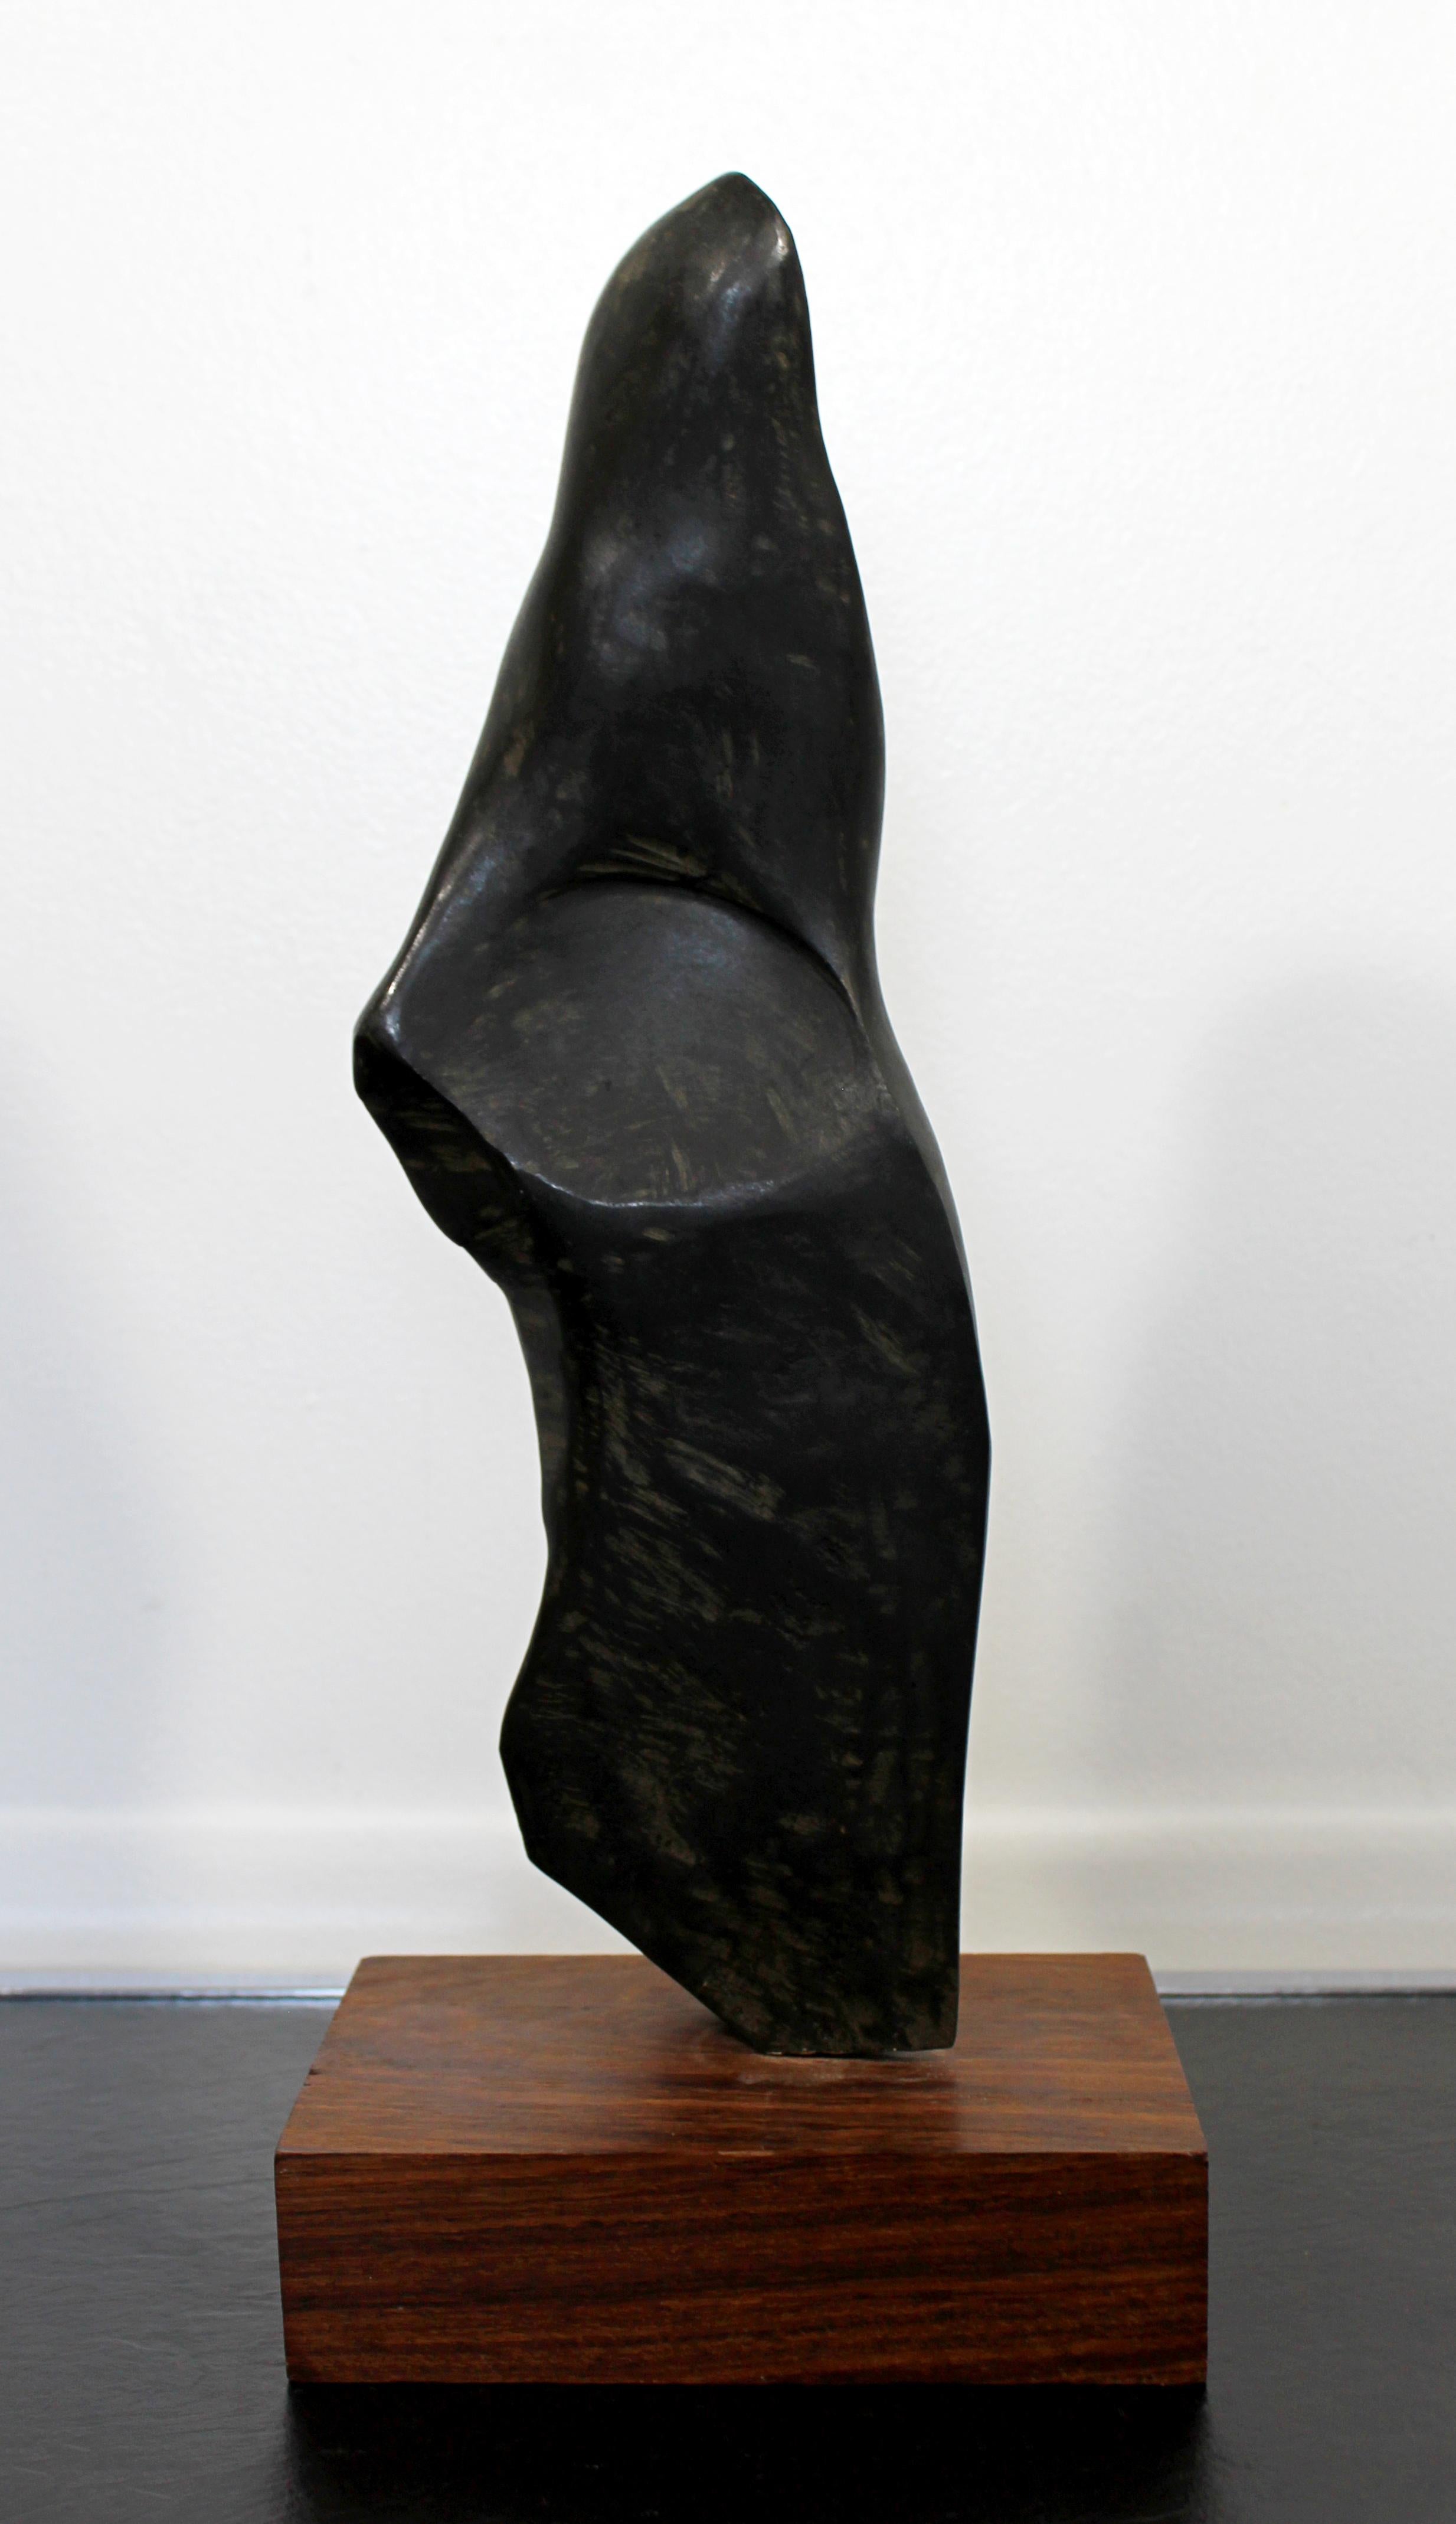 Late 20th Century Contemporary Modern Stone Table Sculpture on Wood Base Signed Leonard Schwartz